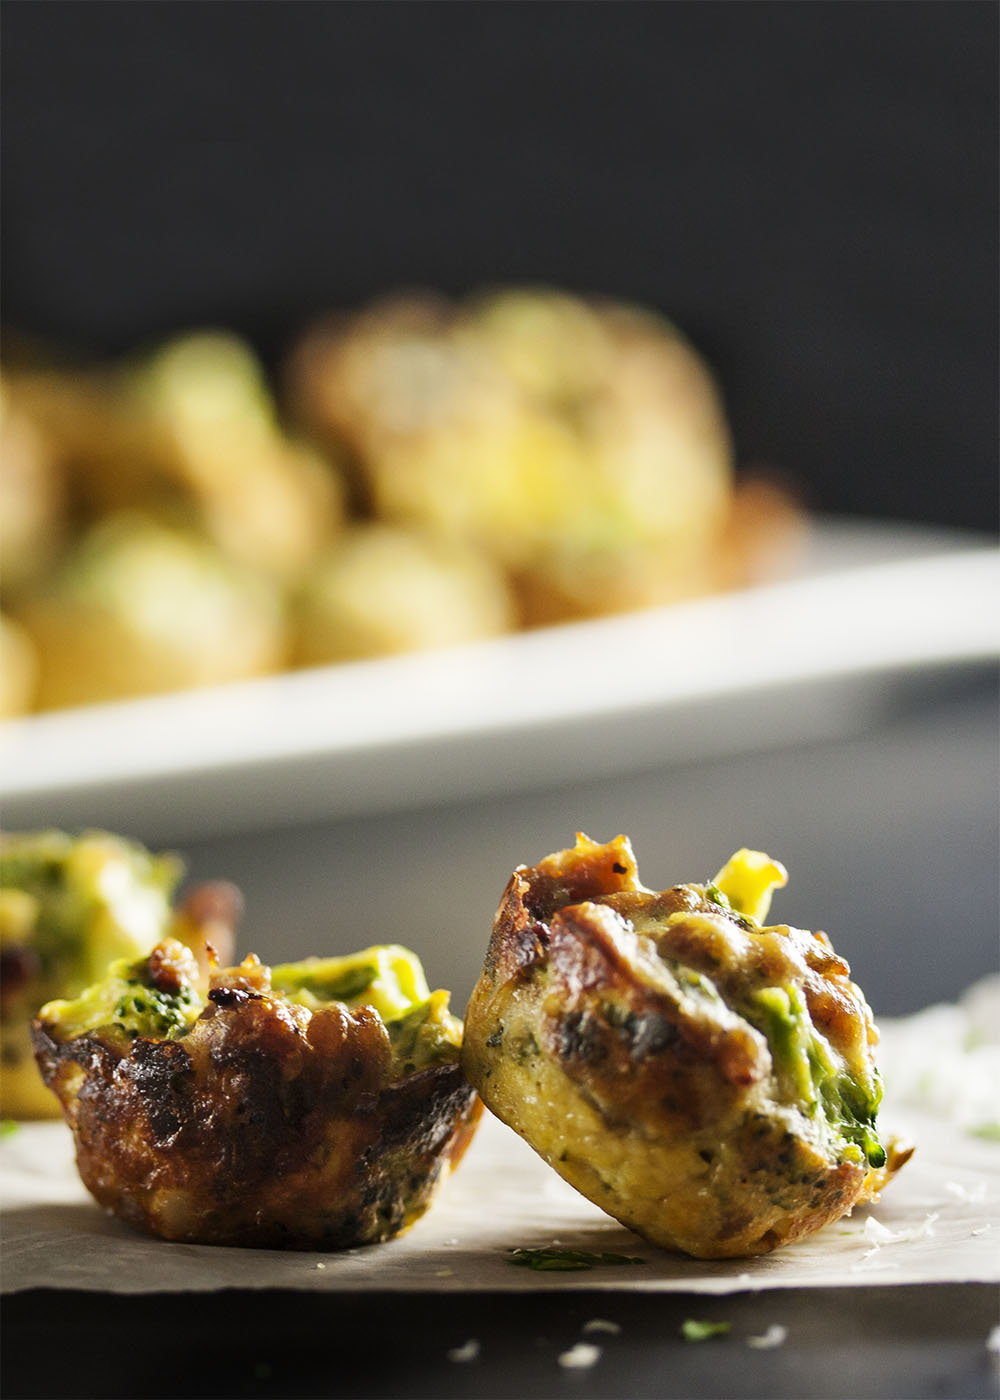 Three Cheese Broccoli Bites - Italian sausage and ricotta combine with broccoli and even more cheese to pack a pile of flavor into each little bite. Excellent as a side dish or an appetizer! | justalittlebitofbacon.com